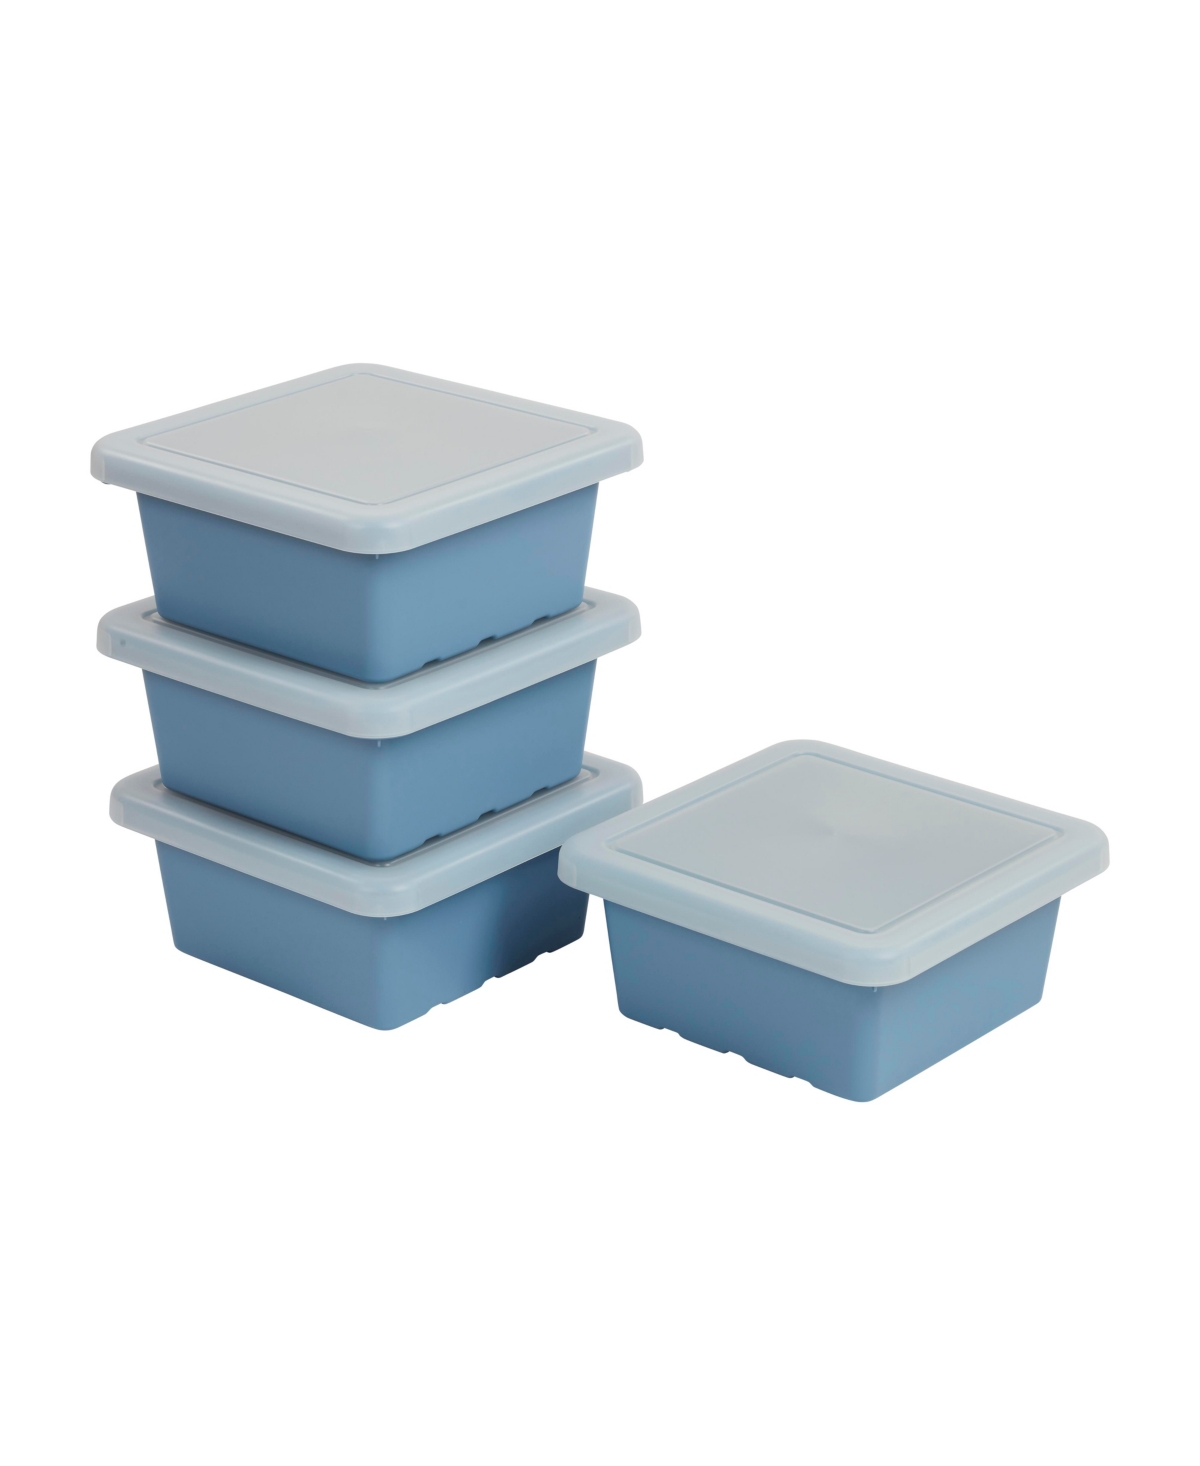 Square Bin with Lid, Fern Green, 4-Pack - Turquoise